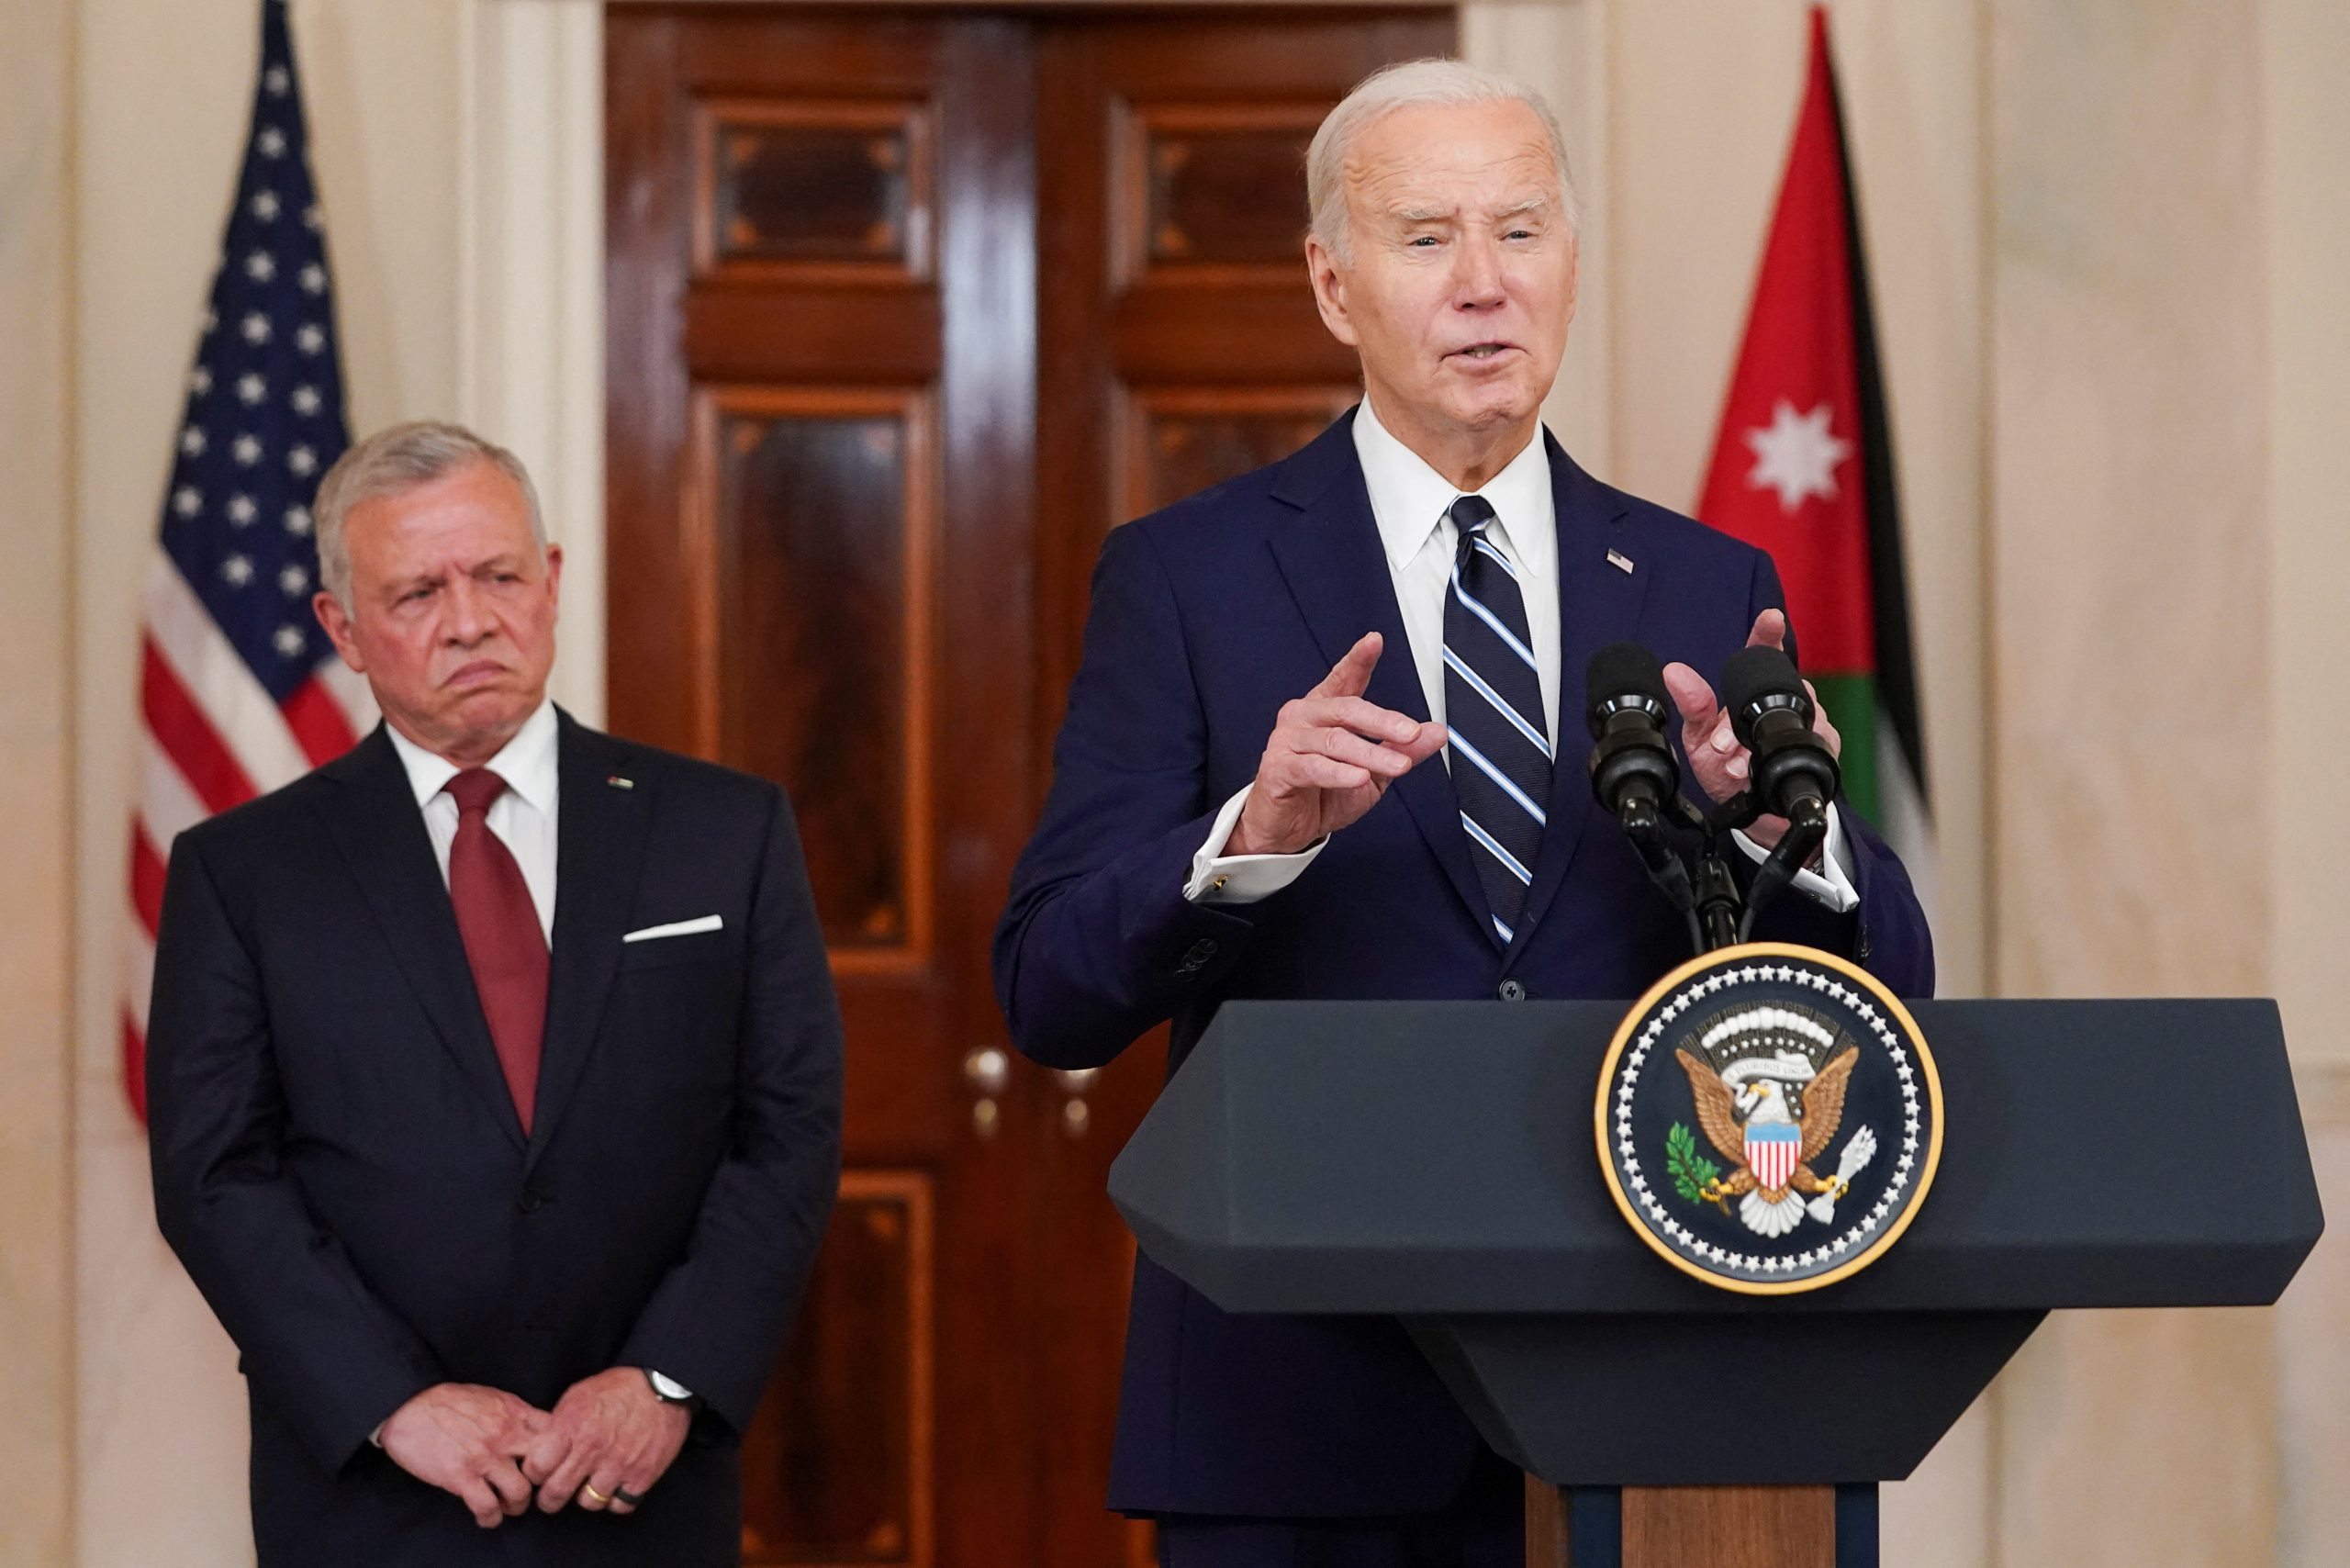 Biden Pushes for 6-Week Fighting Pause in Israel-Hamas Hostage Deal